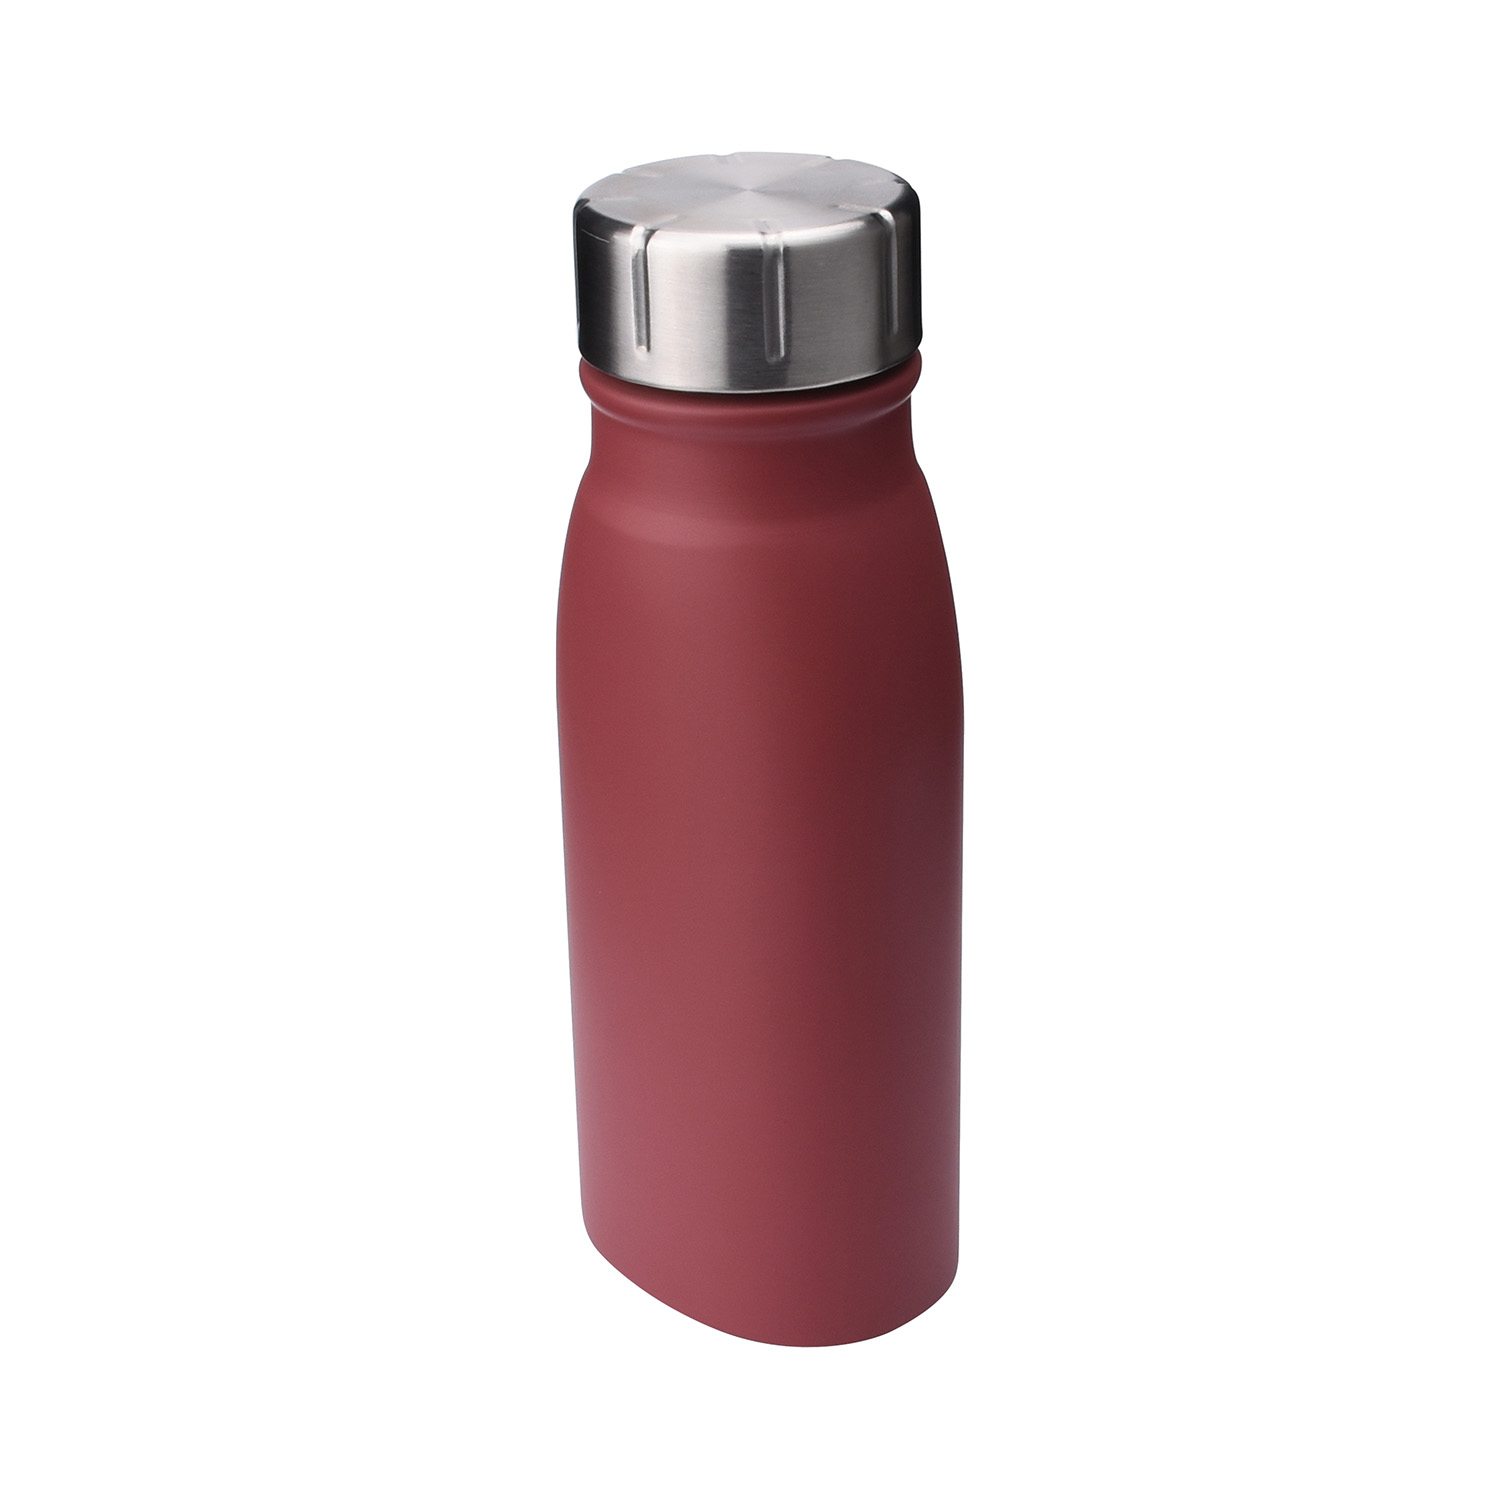 https://www.waterbottle.tech/wp-content/uploads/2021/11/insulated-flat-oval-square-stainless-steel-water-bottle-s11350a2-2.jpg